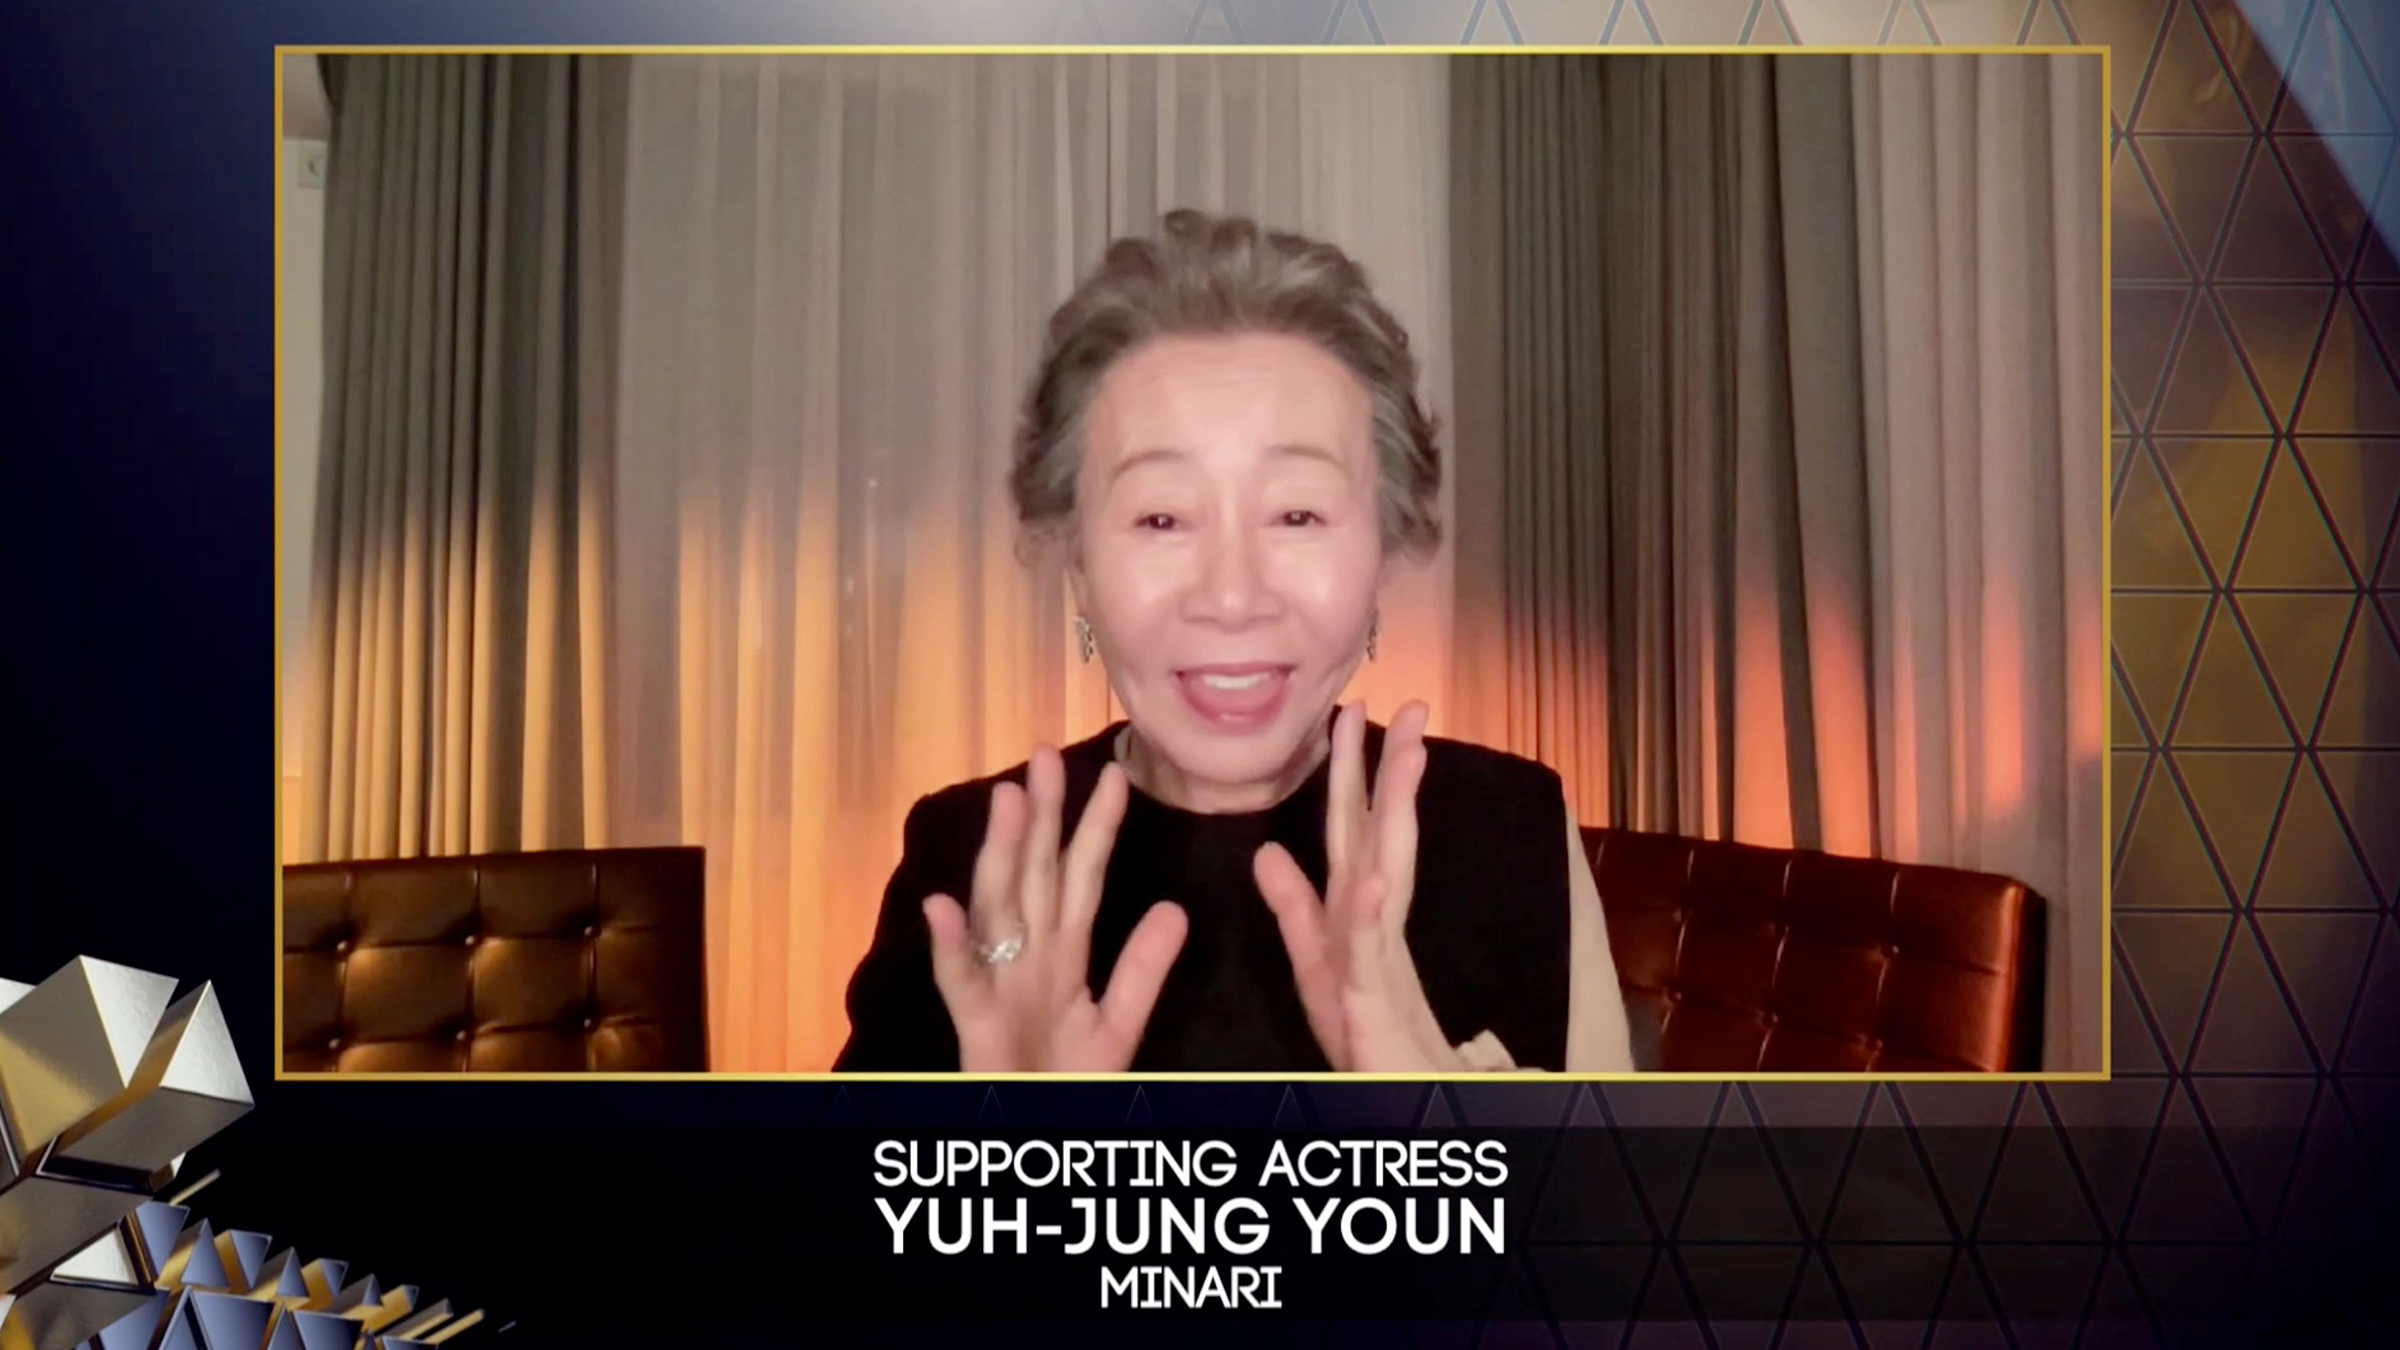 Yuh-Jung Youn wins Supporting Actress at the BAFTAs on April 11.